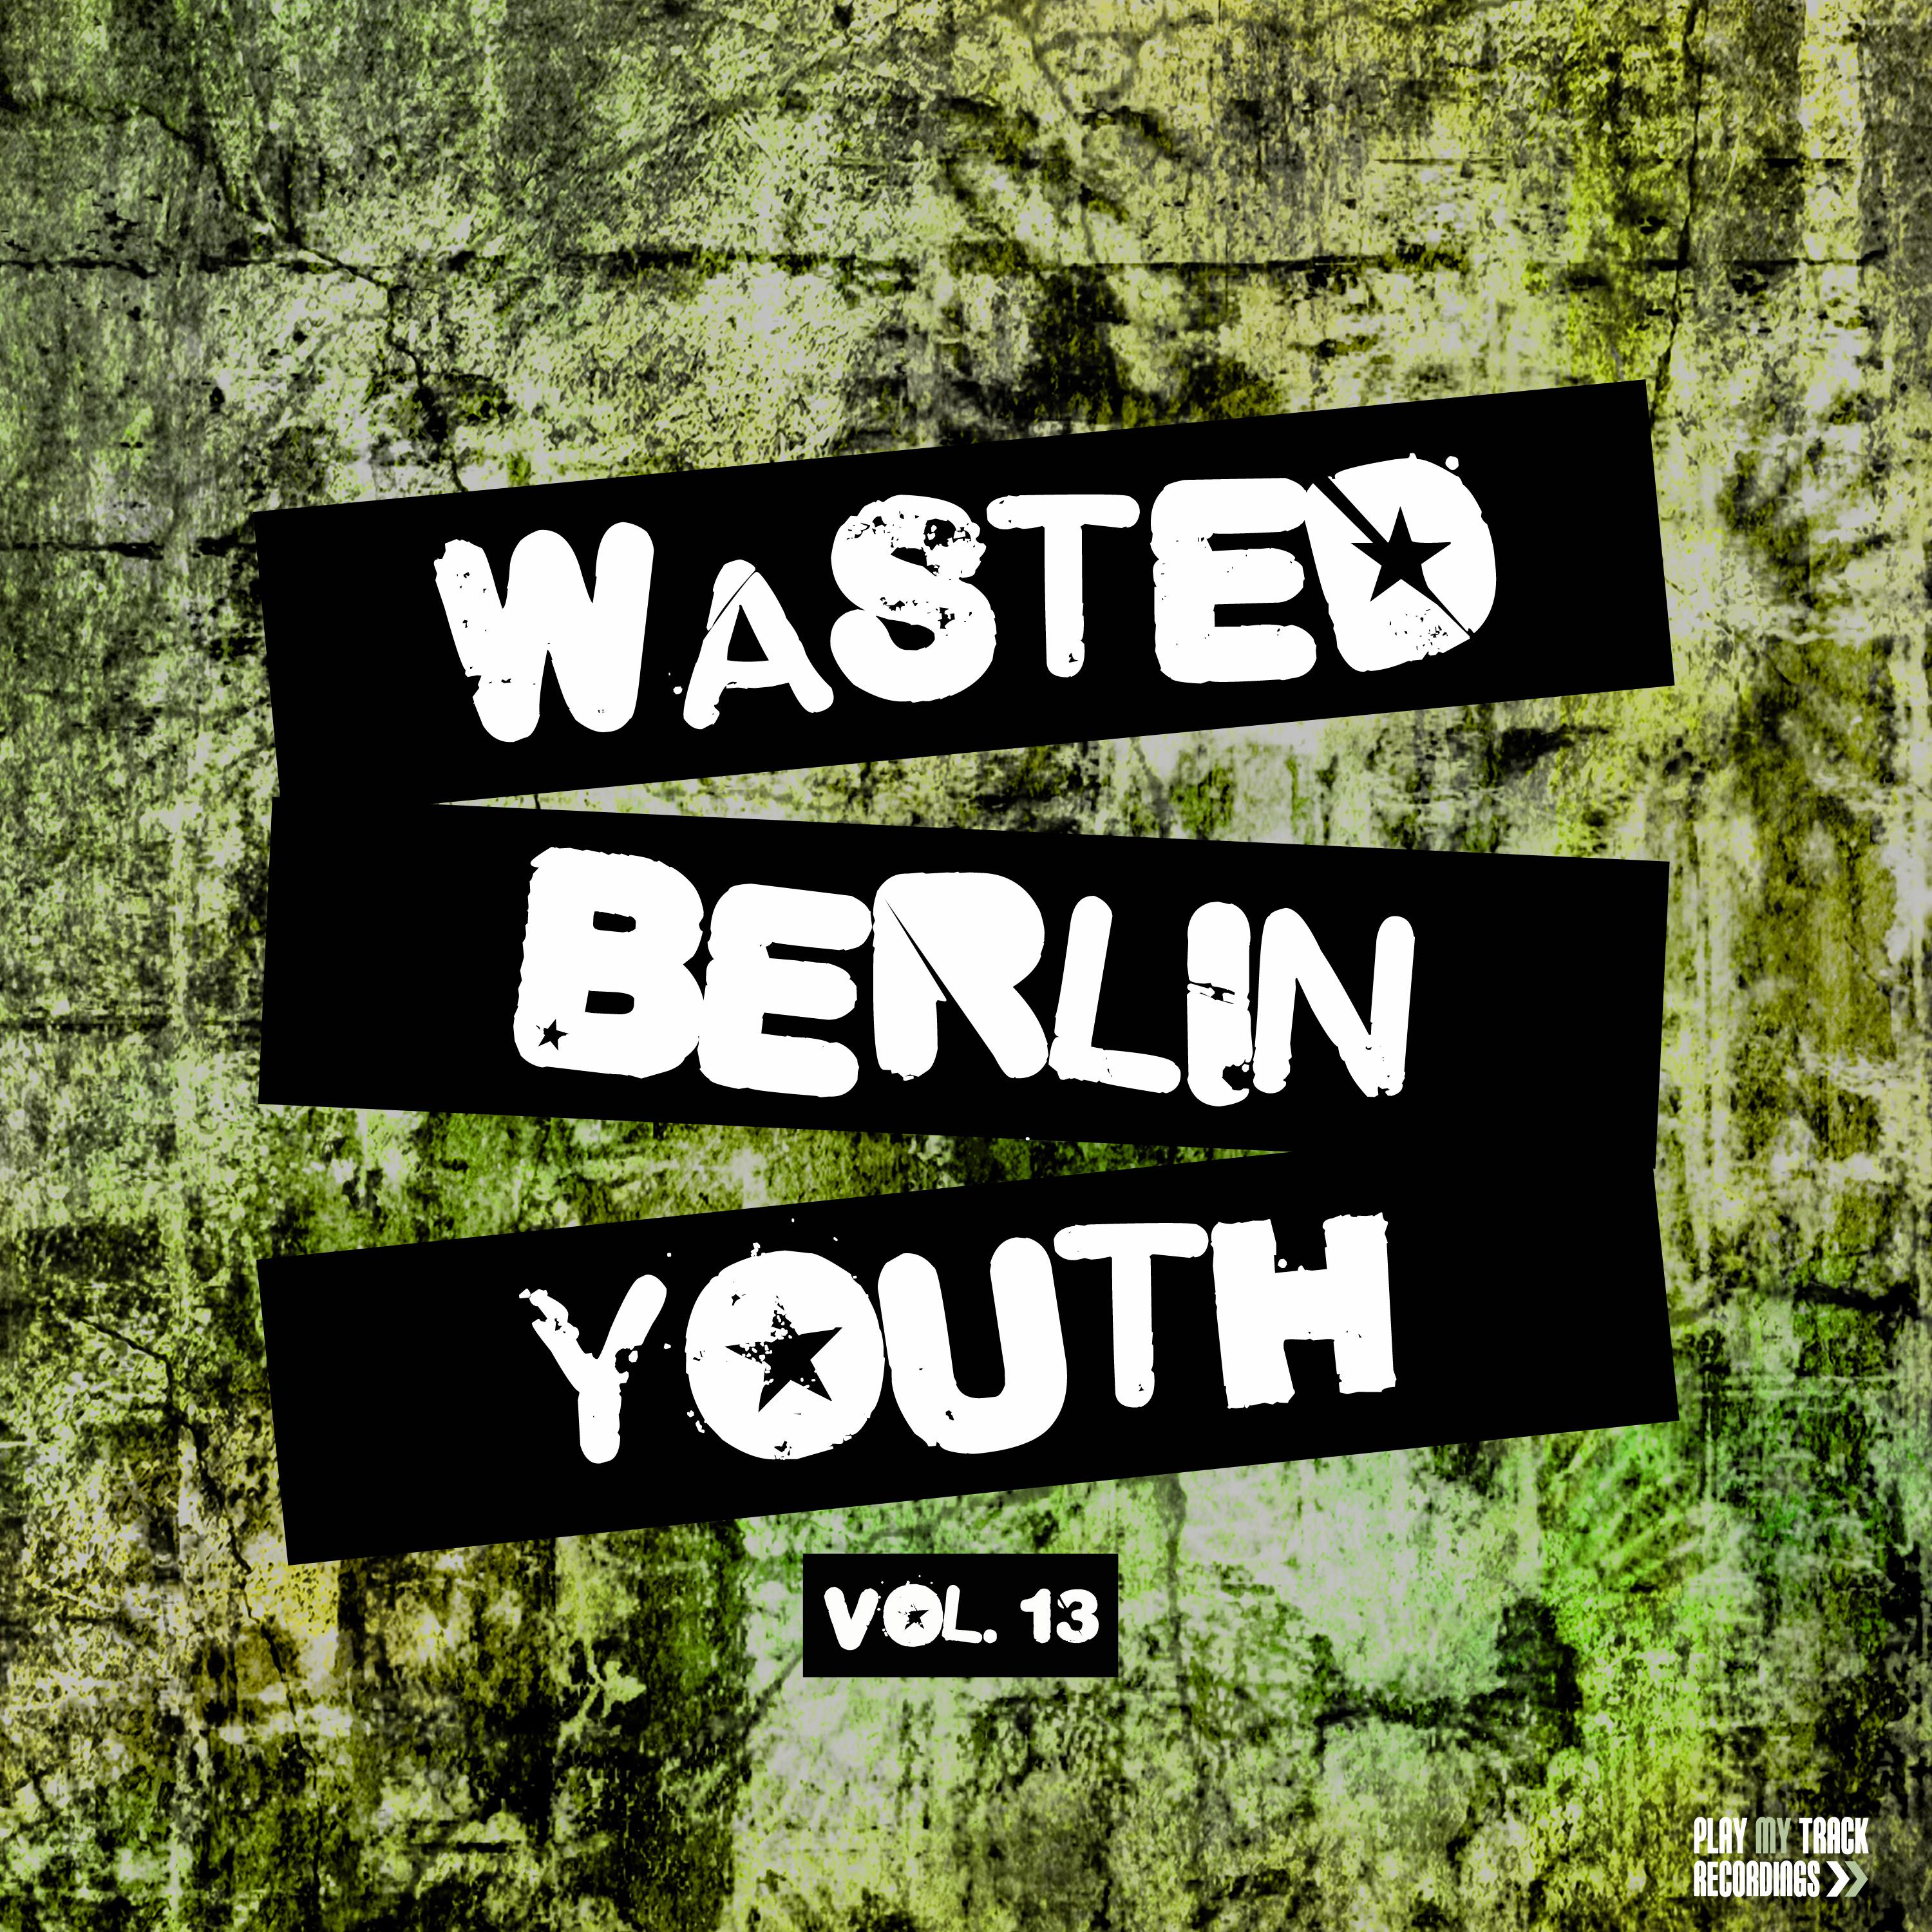 Wasted Berlin Youth, Vol. 13